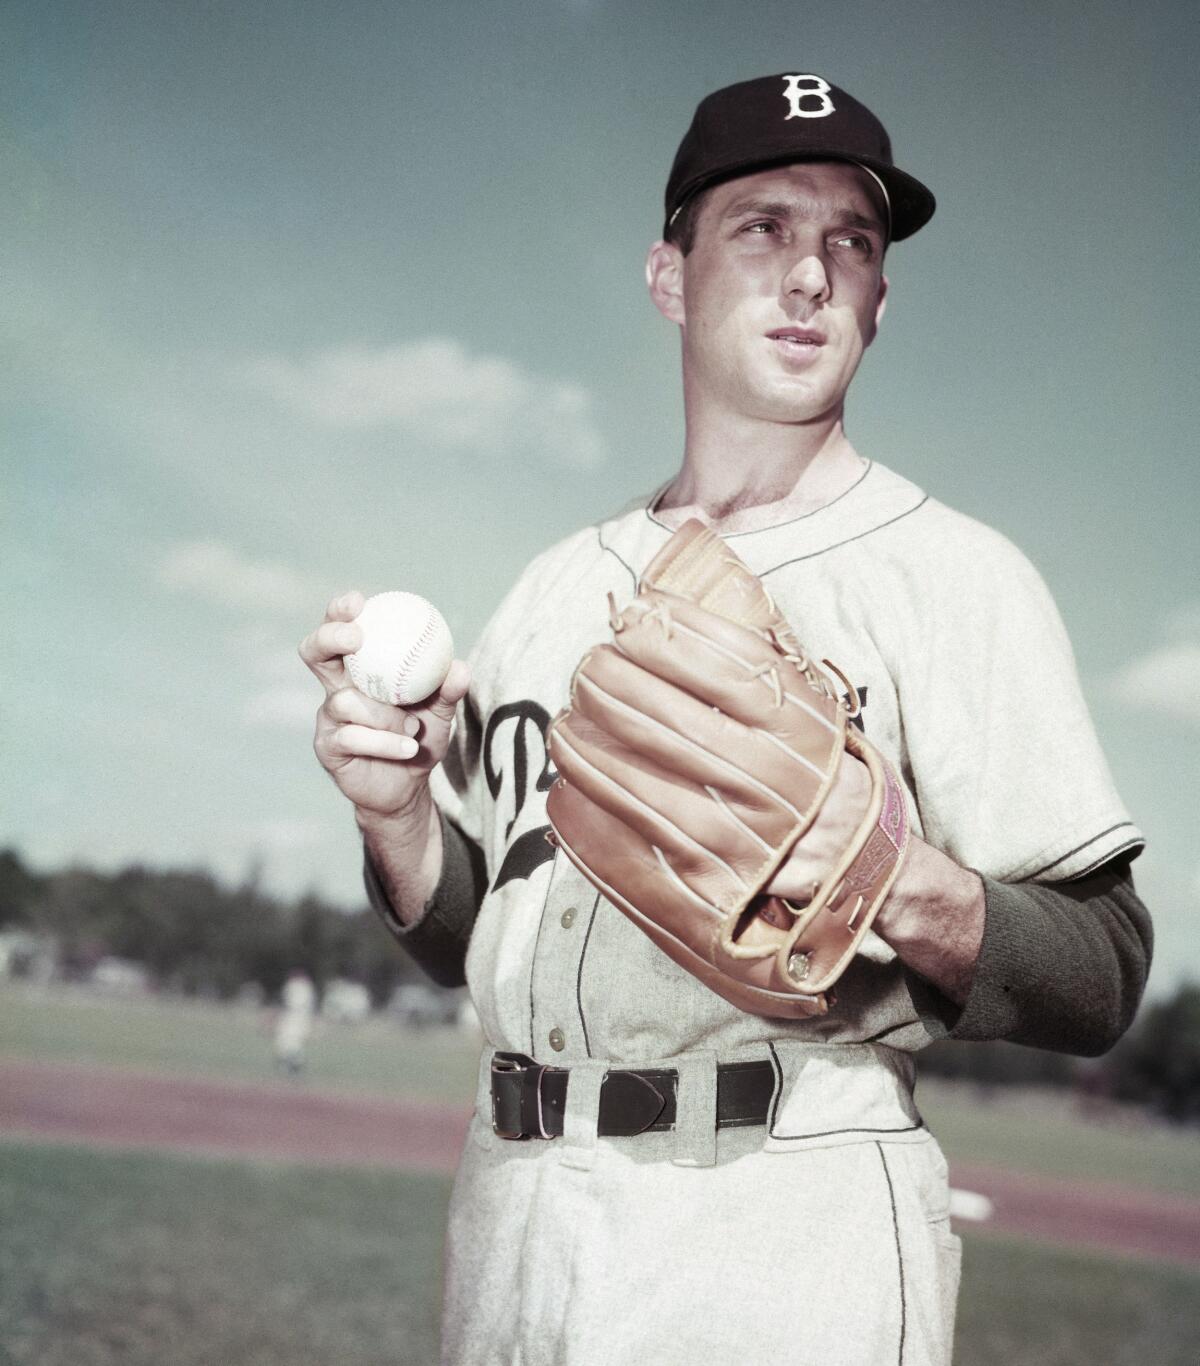 Brooklyn Dodgers pitcher Carl Erskine holds the ball and looks across the field.